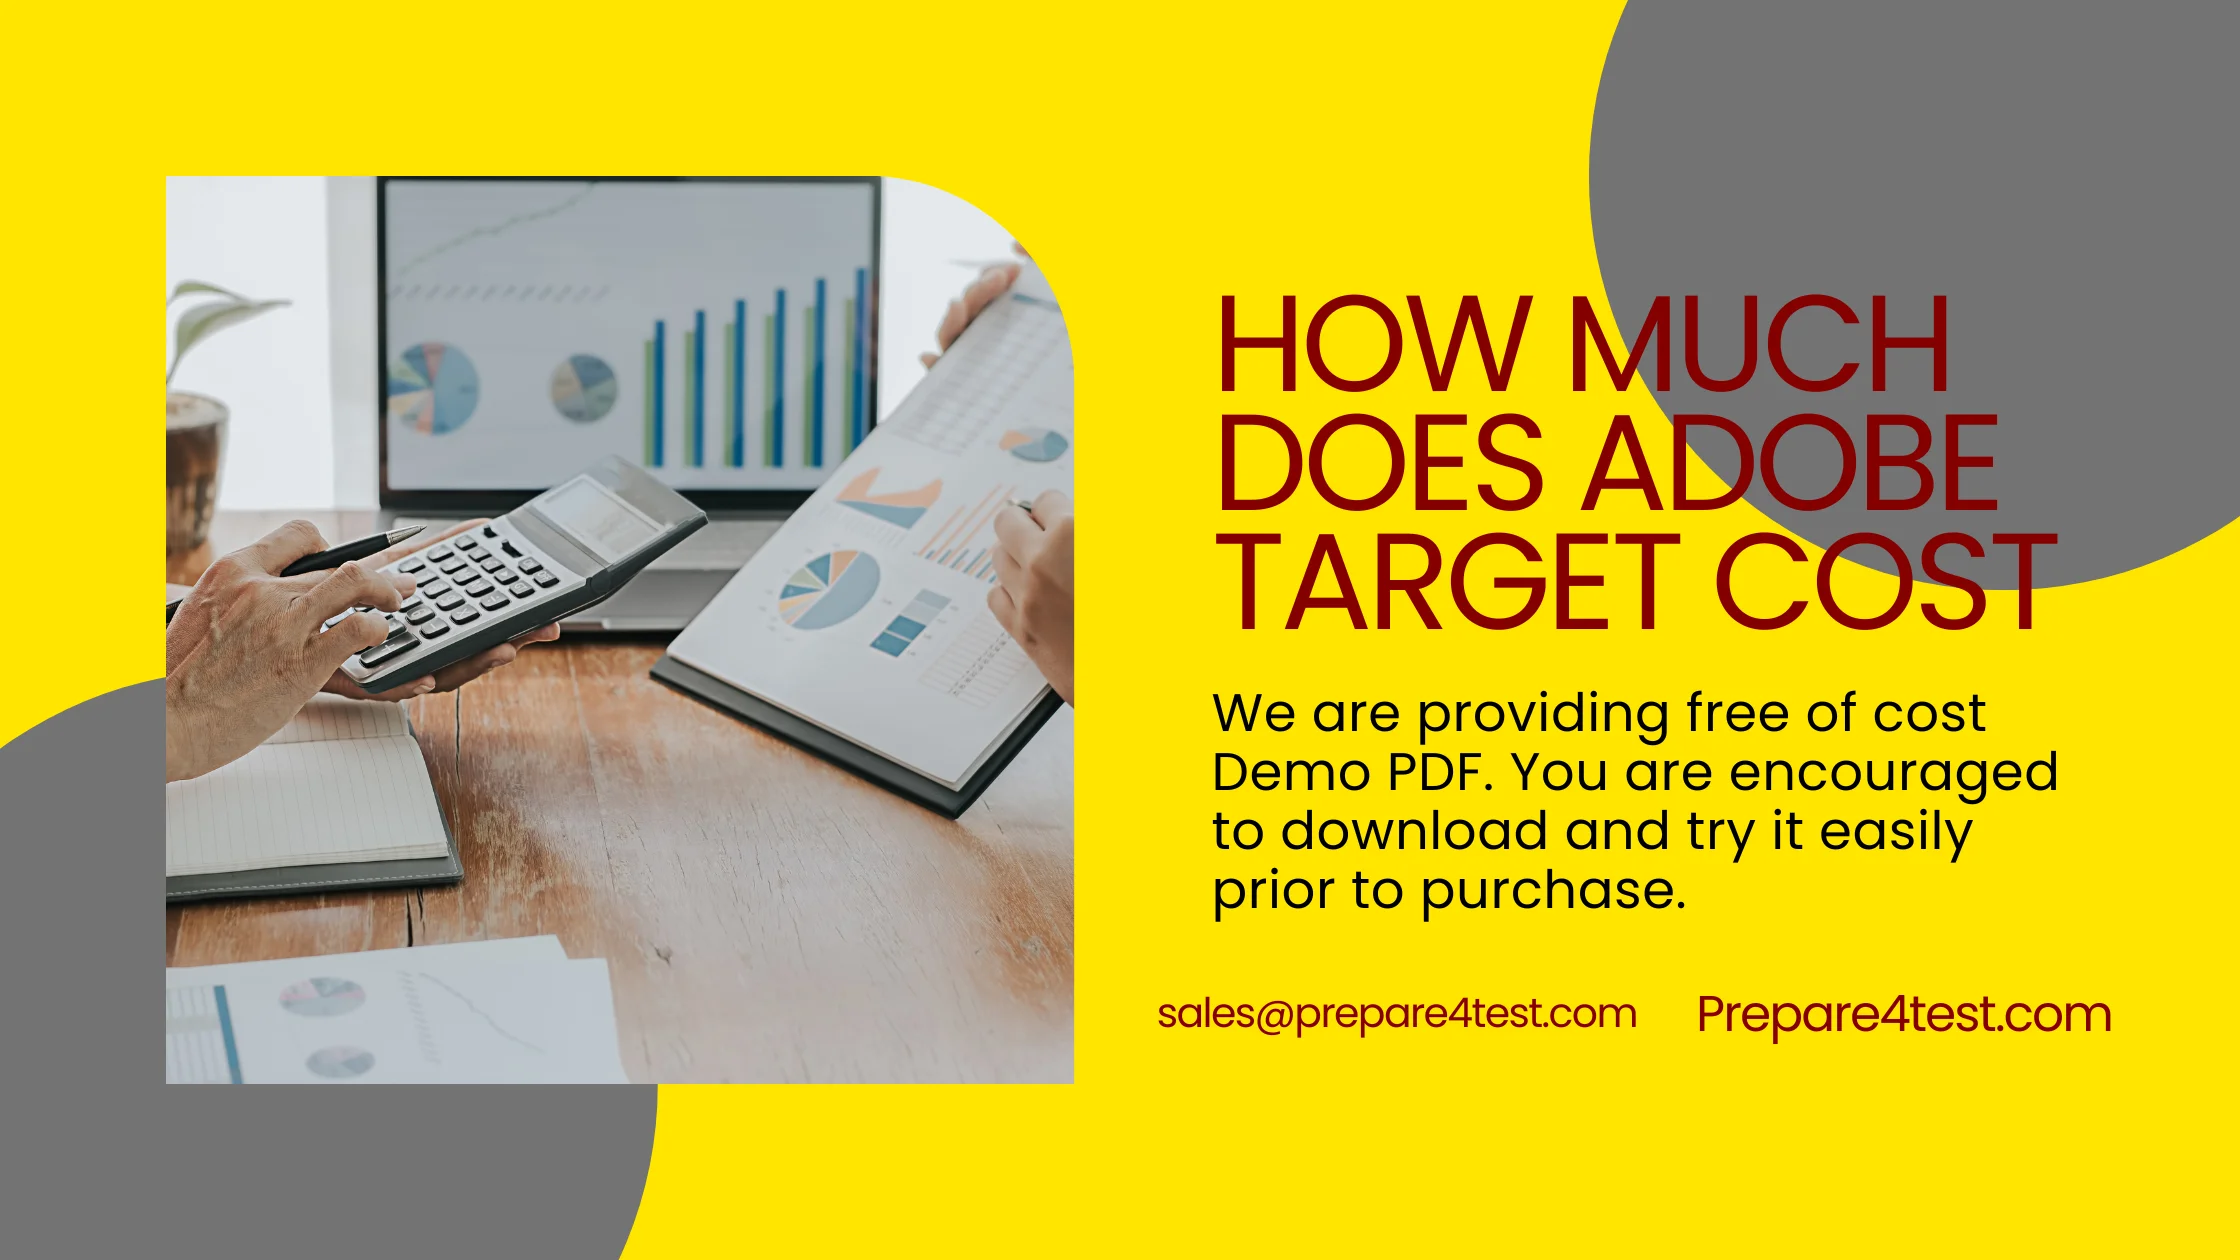 how much does adobe target cost promo